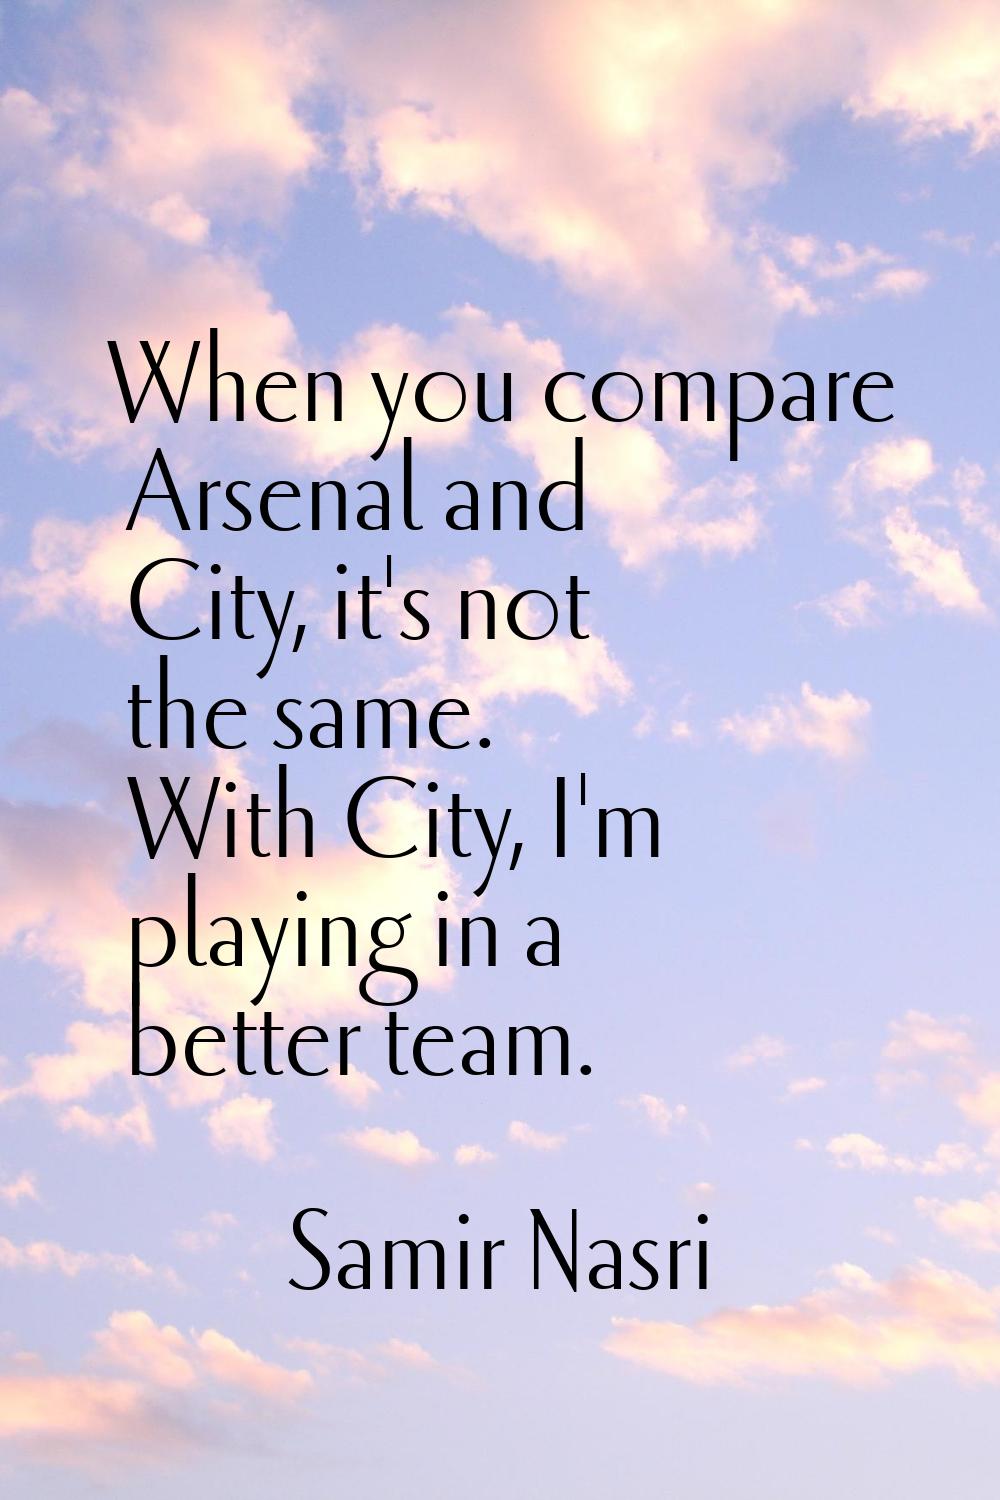 When you compare Arsenal and City, it's not the same. With City, I'm playing in a better team.